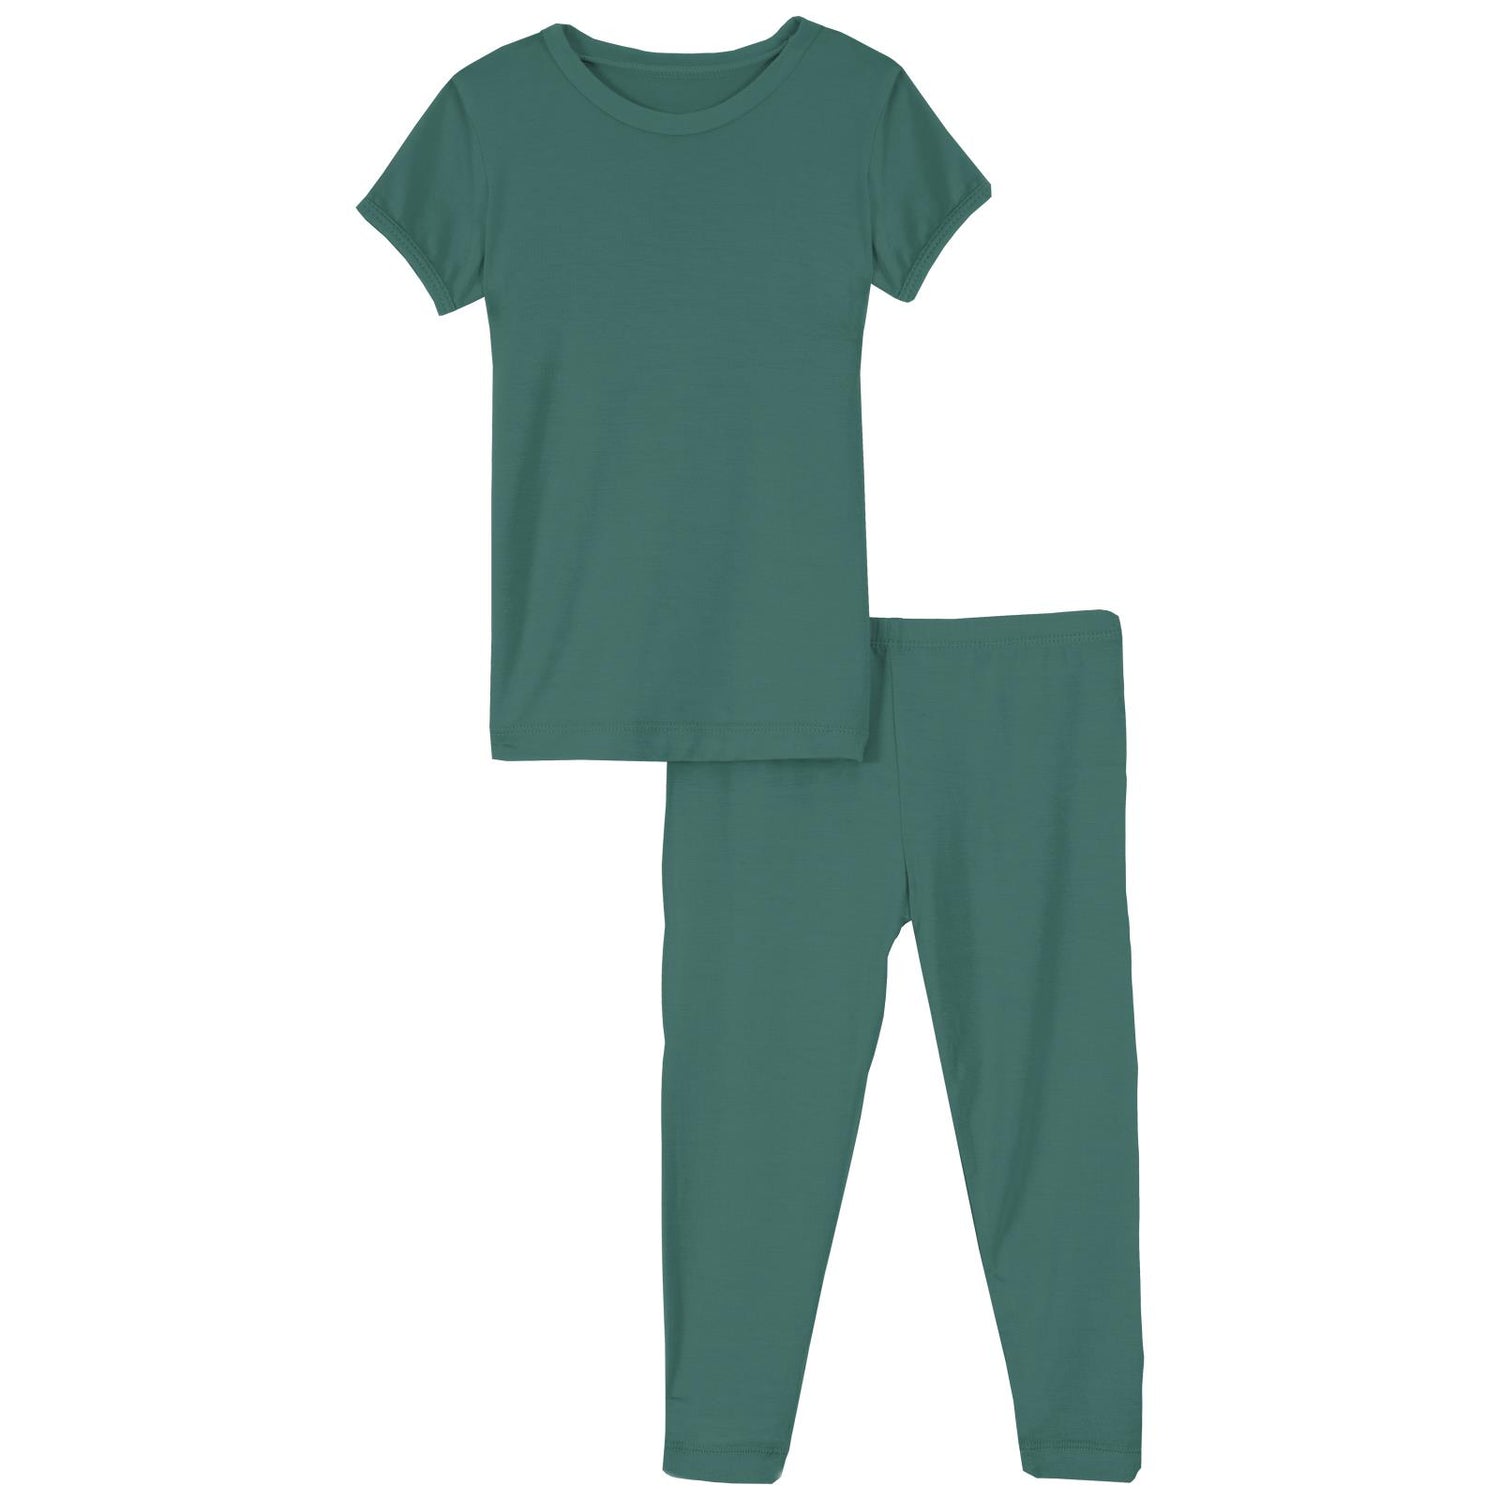 Short Sleeve Luxe Jersey Pajama Set in Ivy